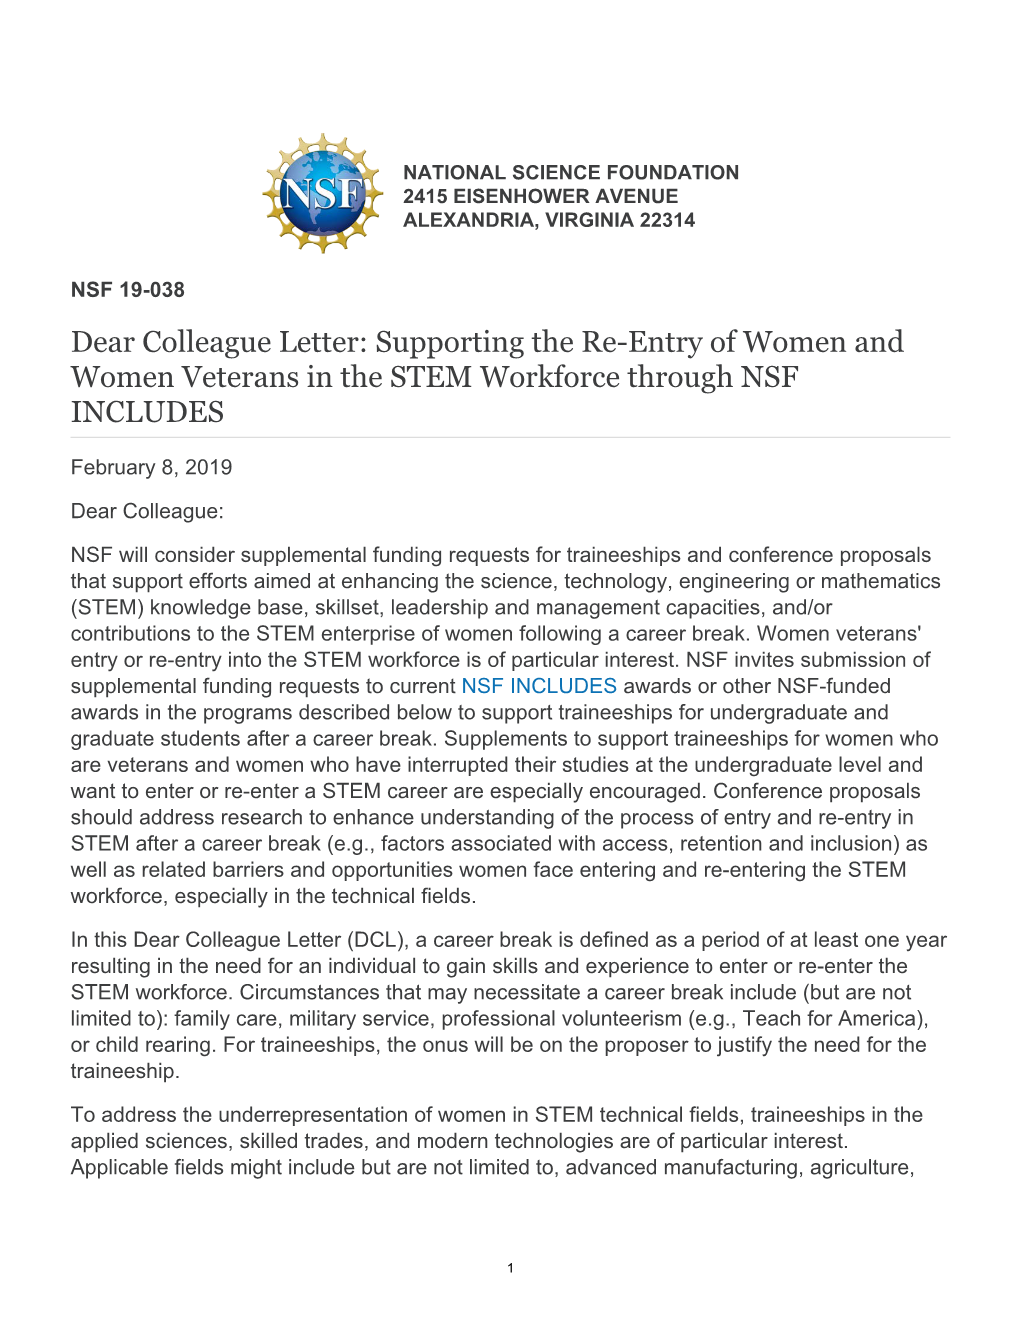 Supporting the Re-Entry of Women and Women Veterans in the STEM Workforce Through NSF INCLUDES